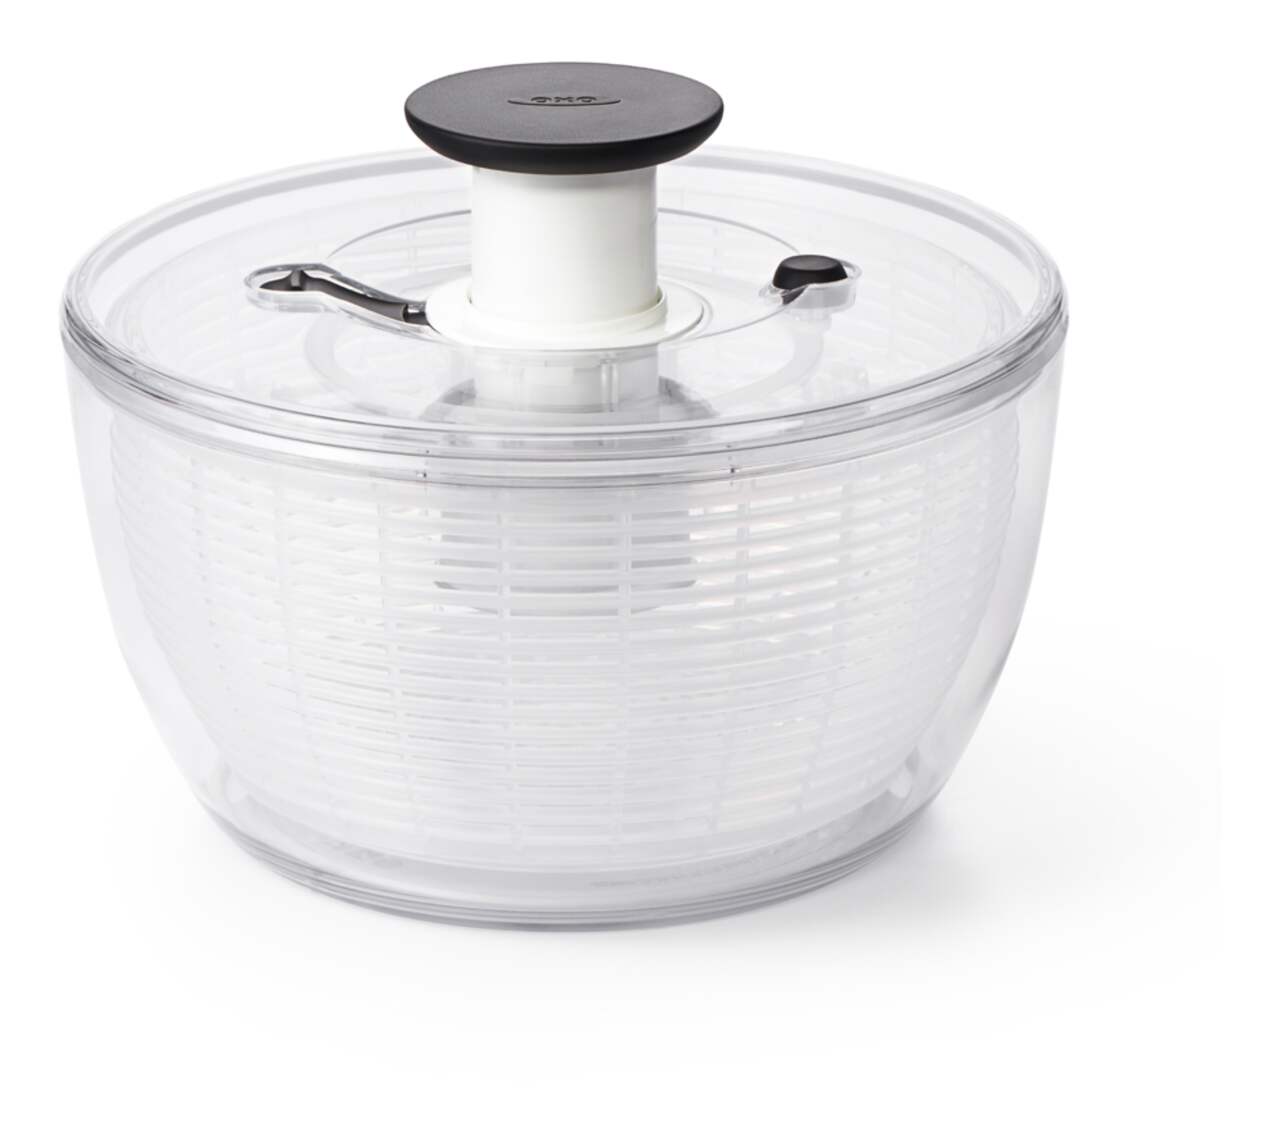 https://media-www.canadiantire.ca/product/living/kitchen/kitchen-tools-thermometers/1429389/oxo-good-grips-clear-salad-spinner-579791a9-b4ca-4f8c-a14c-f218db61279a.png?imdensity=1&imwidth=640&impolicy=mZoom